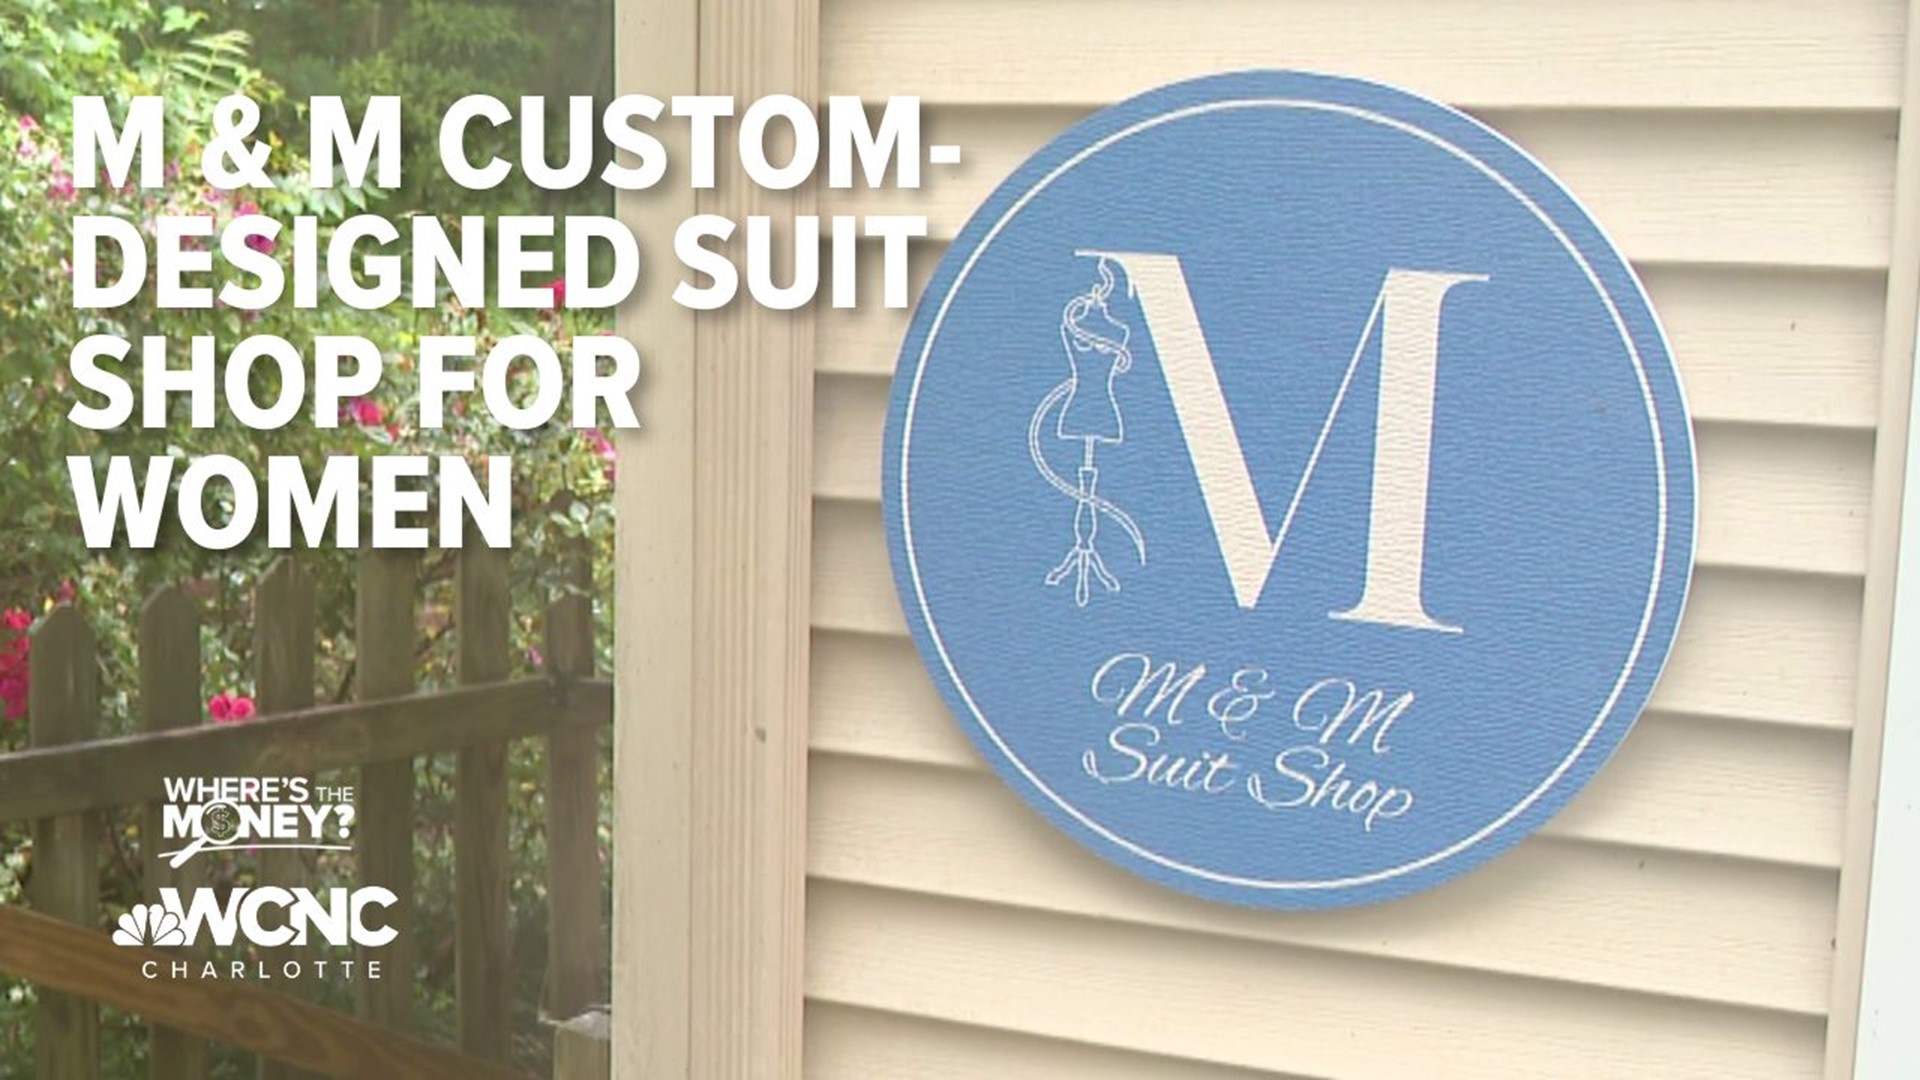 A lesbian couple launched a custom women's suit company after struggling to find comfortable, fashionable clothing for their wedding.